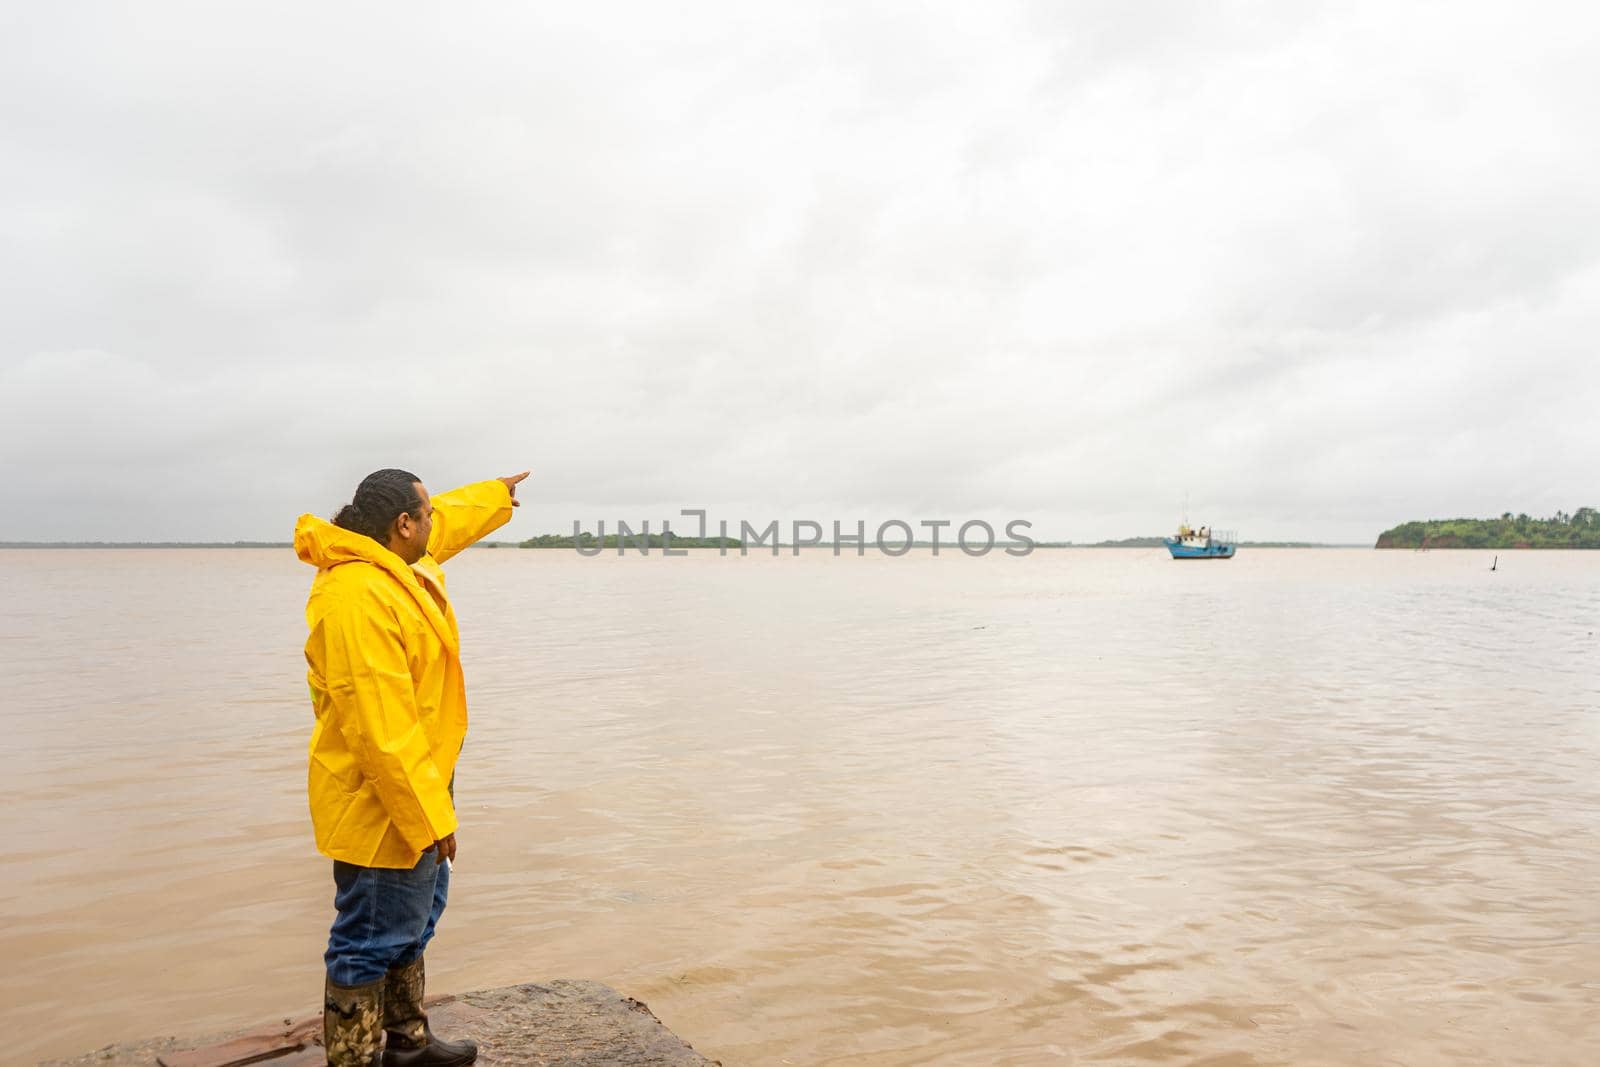 Latin mature man in yelllow raincoat pointing with his hand to a boat in the sea by cfalvarez